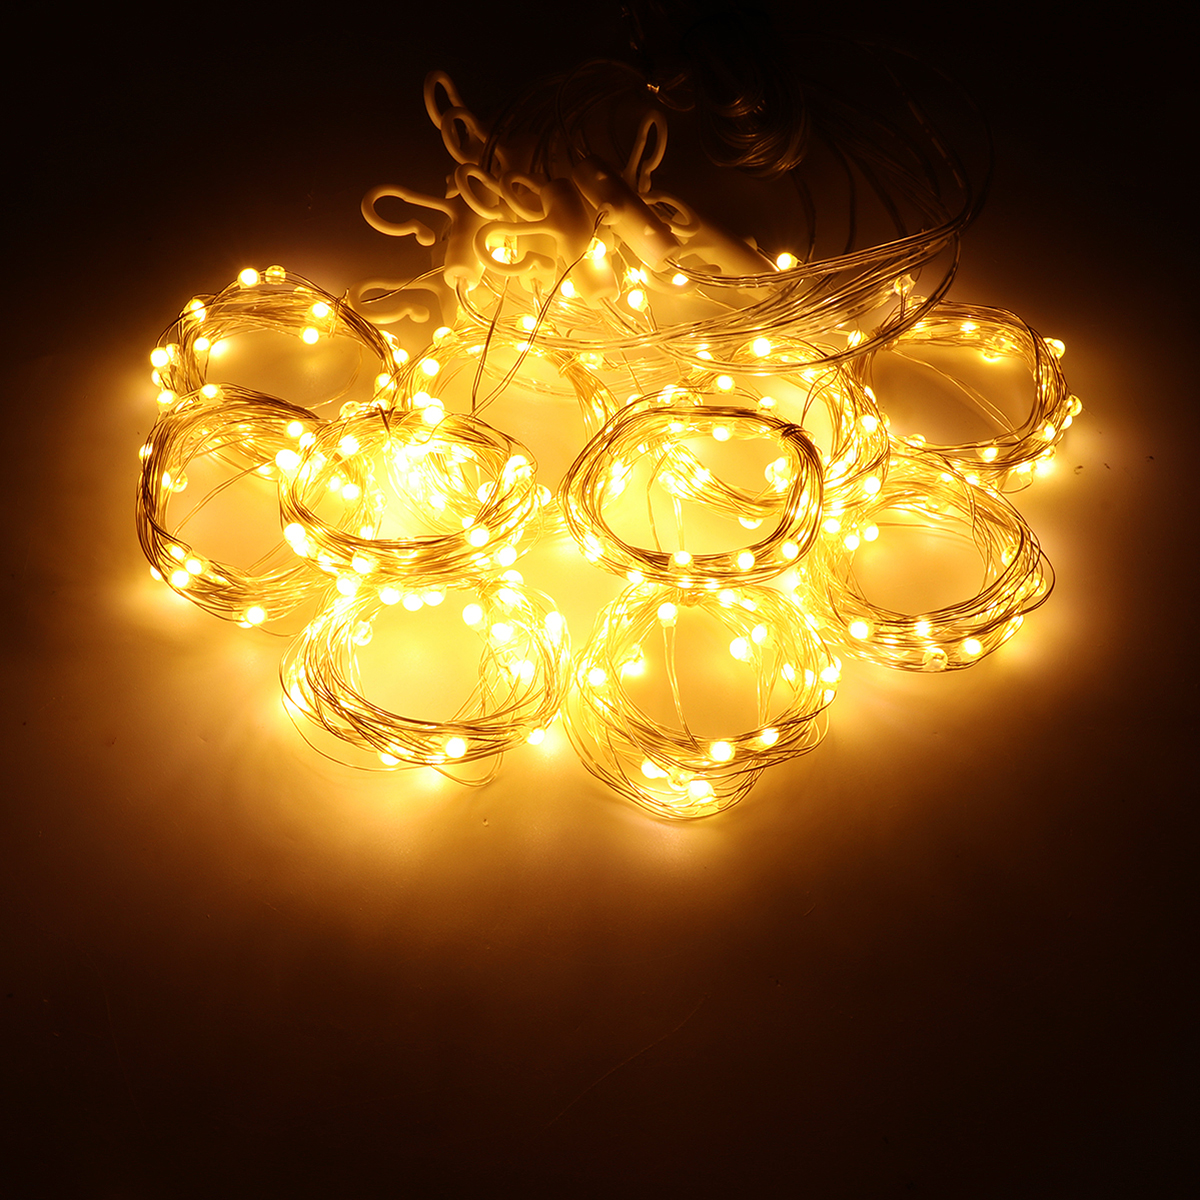 3M2M-USB-200LED-Curtain-Window-Fairy-String-Light-Twinkle-Christmas-Party-Wedding-Holiday-Outdoor-La-1742672-7